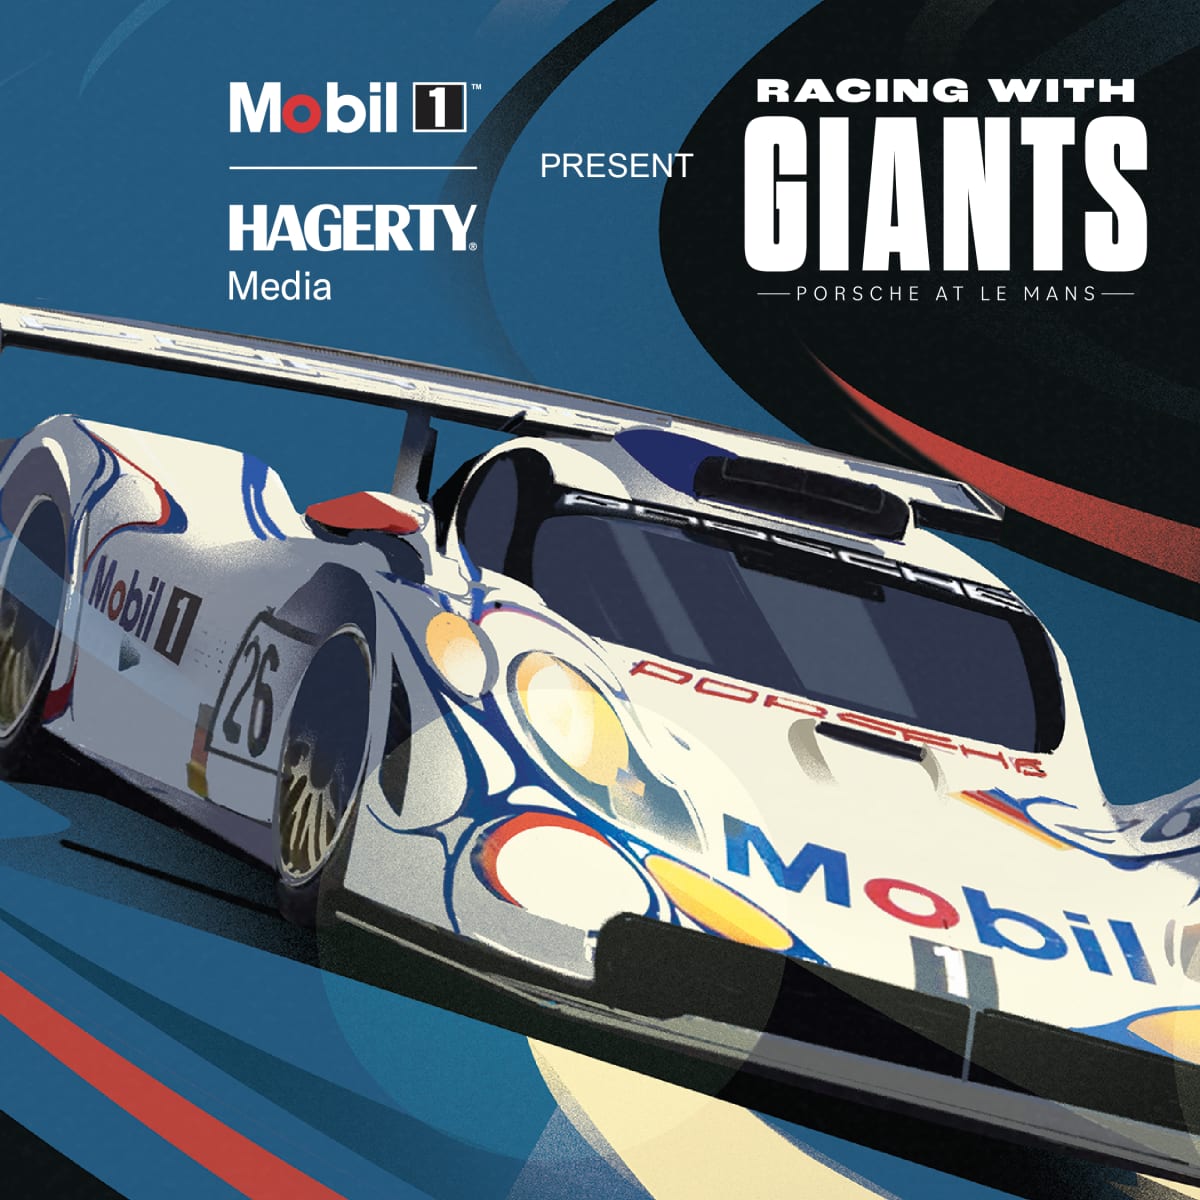 Racing With Giants: Porsche at Le Mans' Mobil 1 full documentary is now  live - Auto Racing Digest